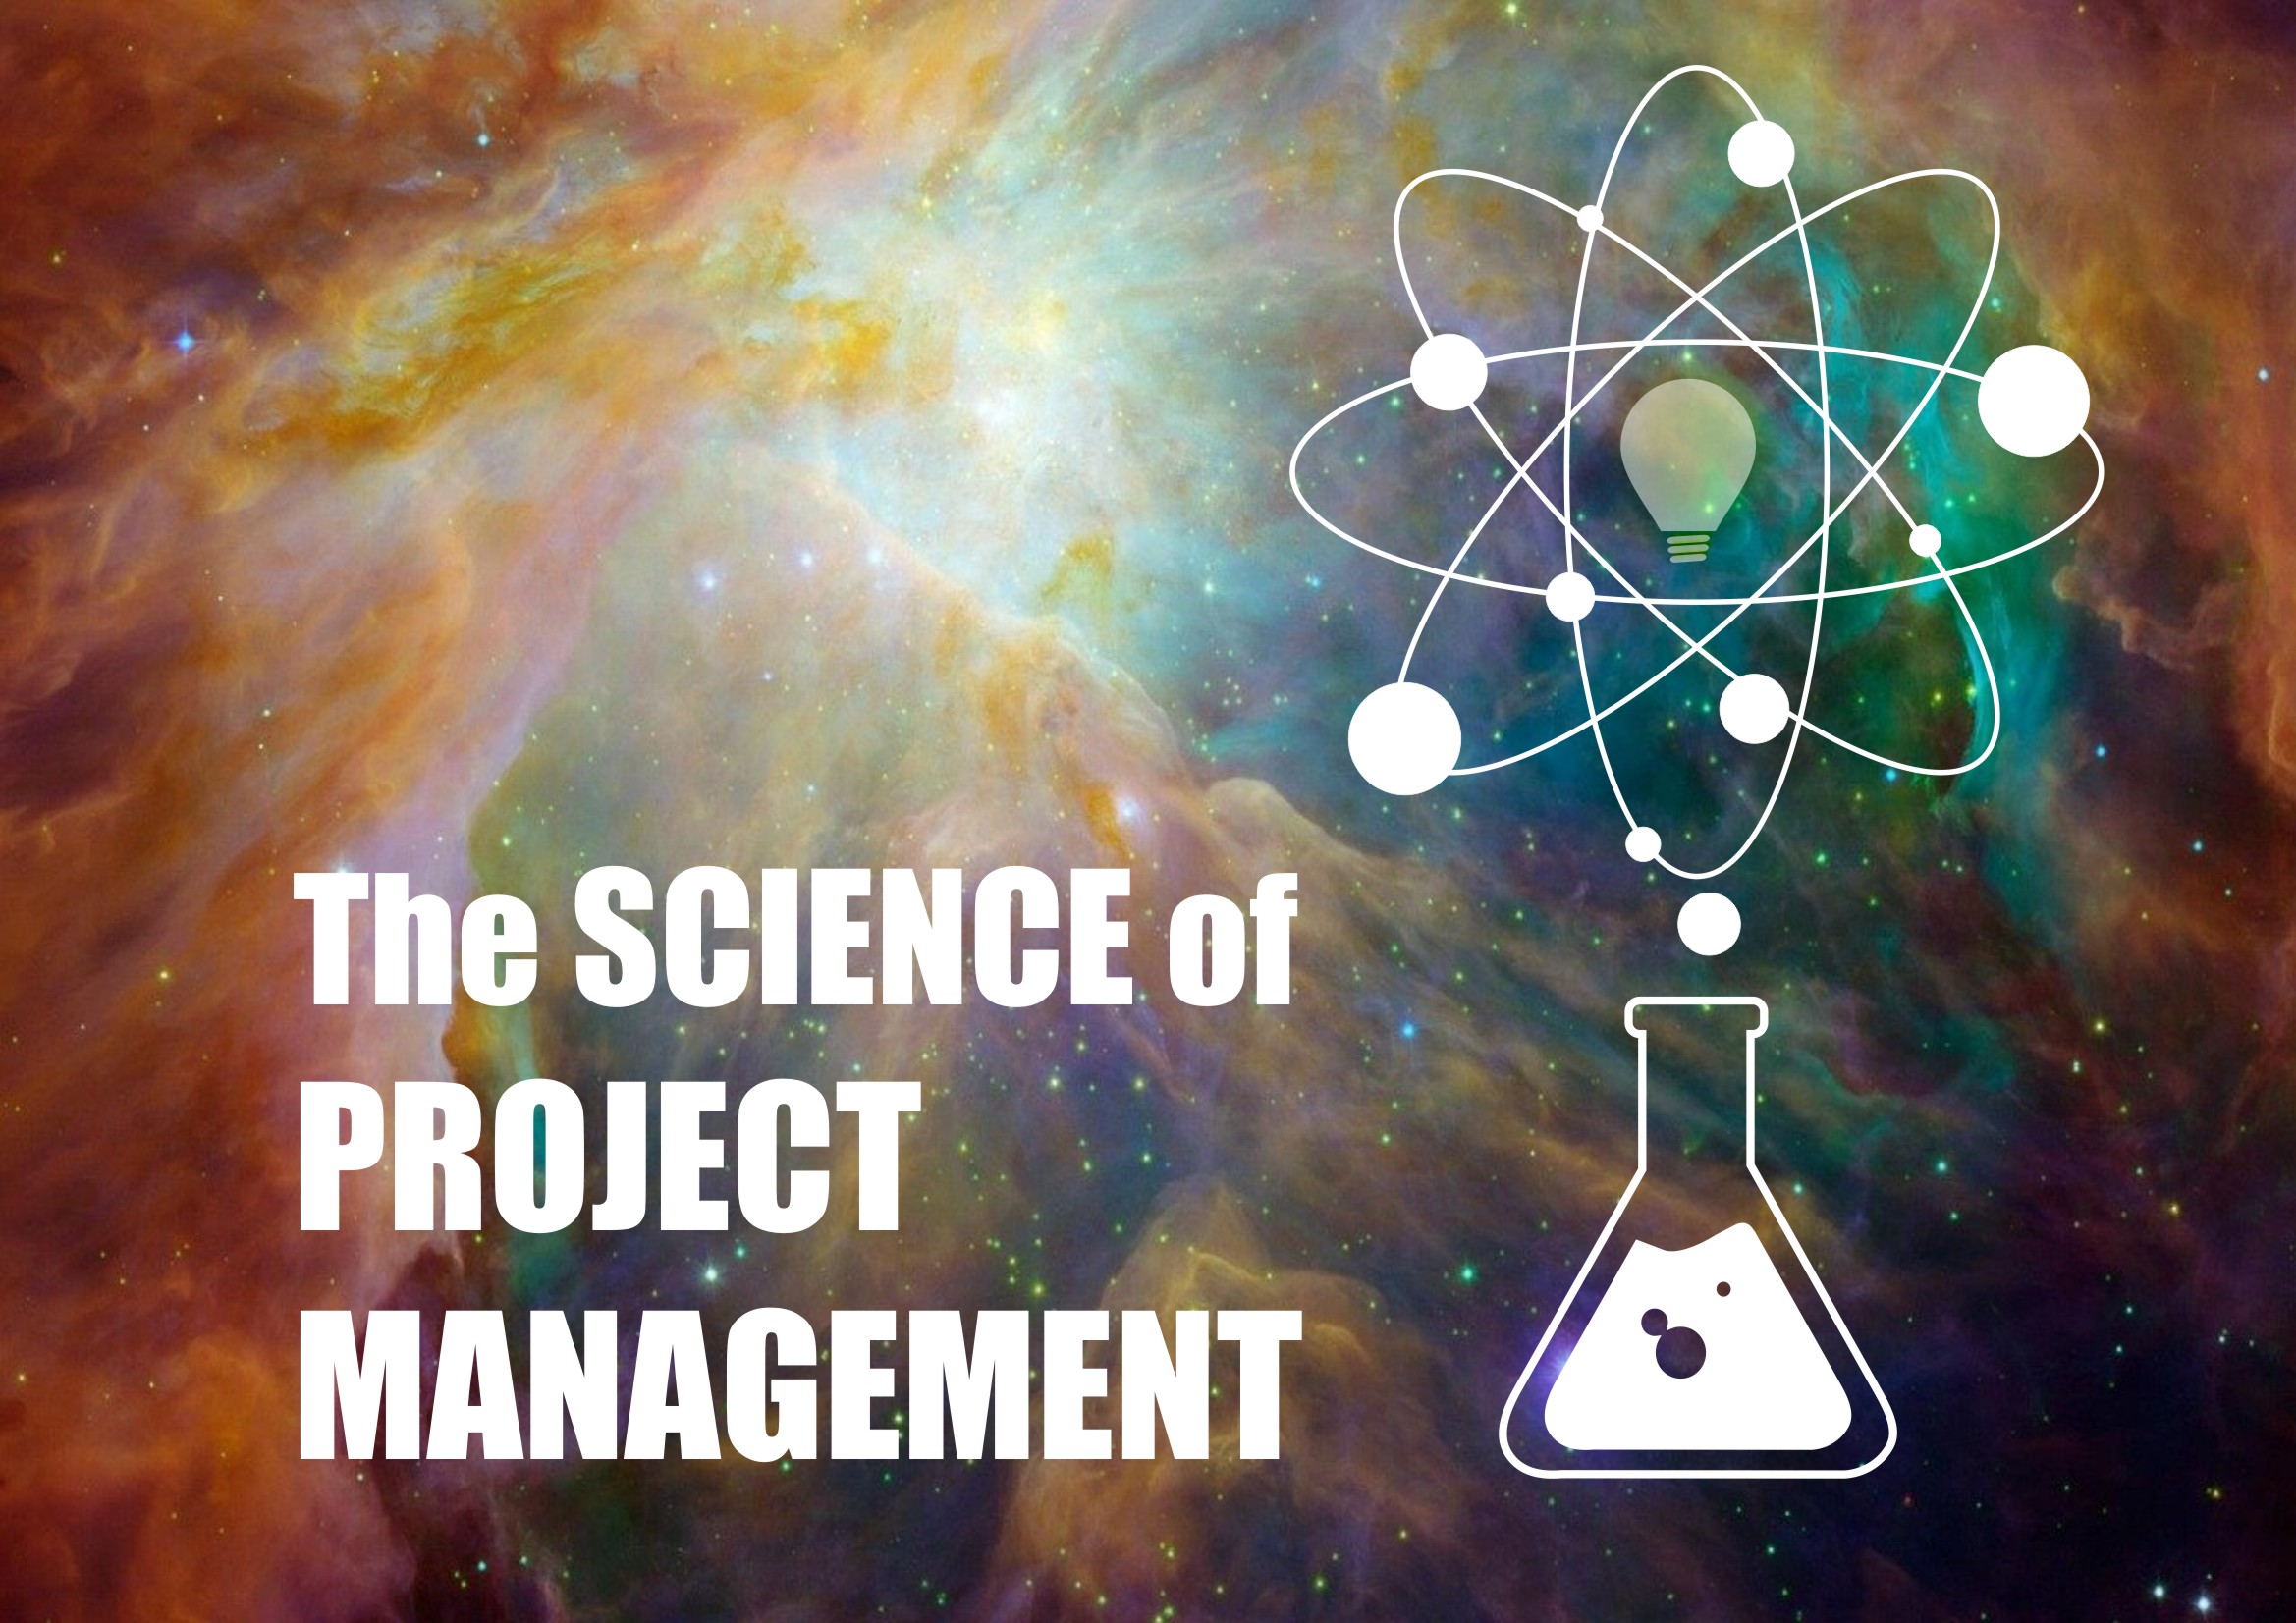 The science of project management